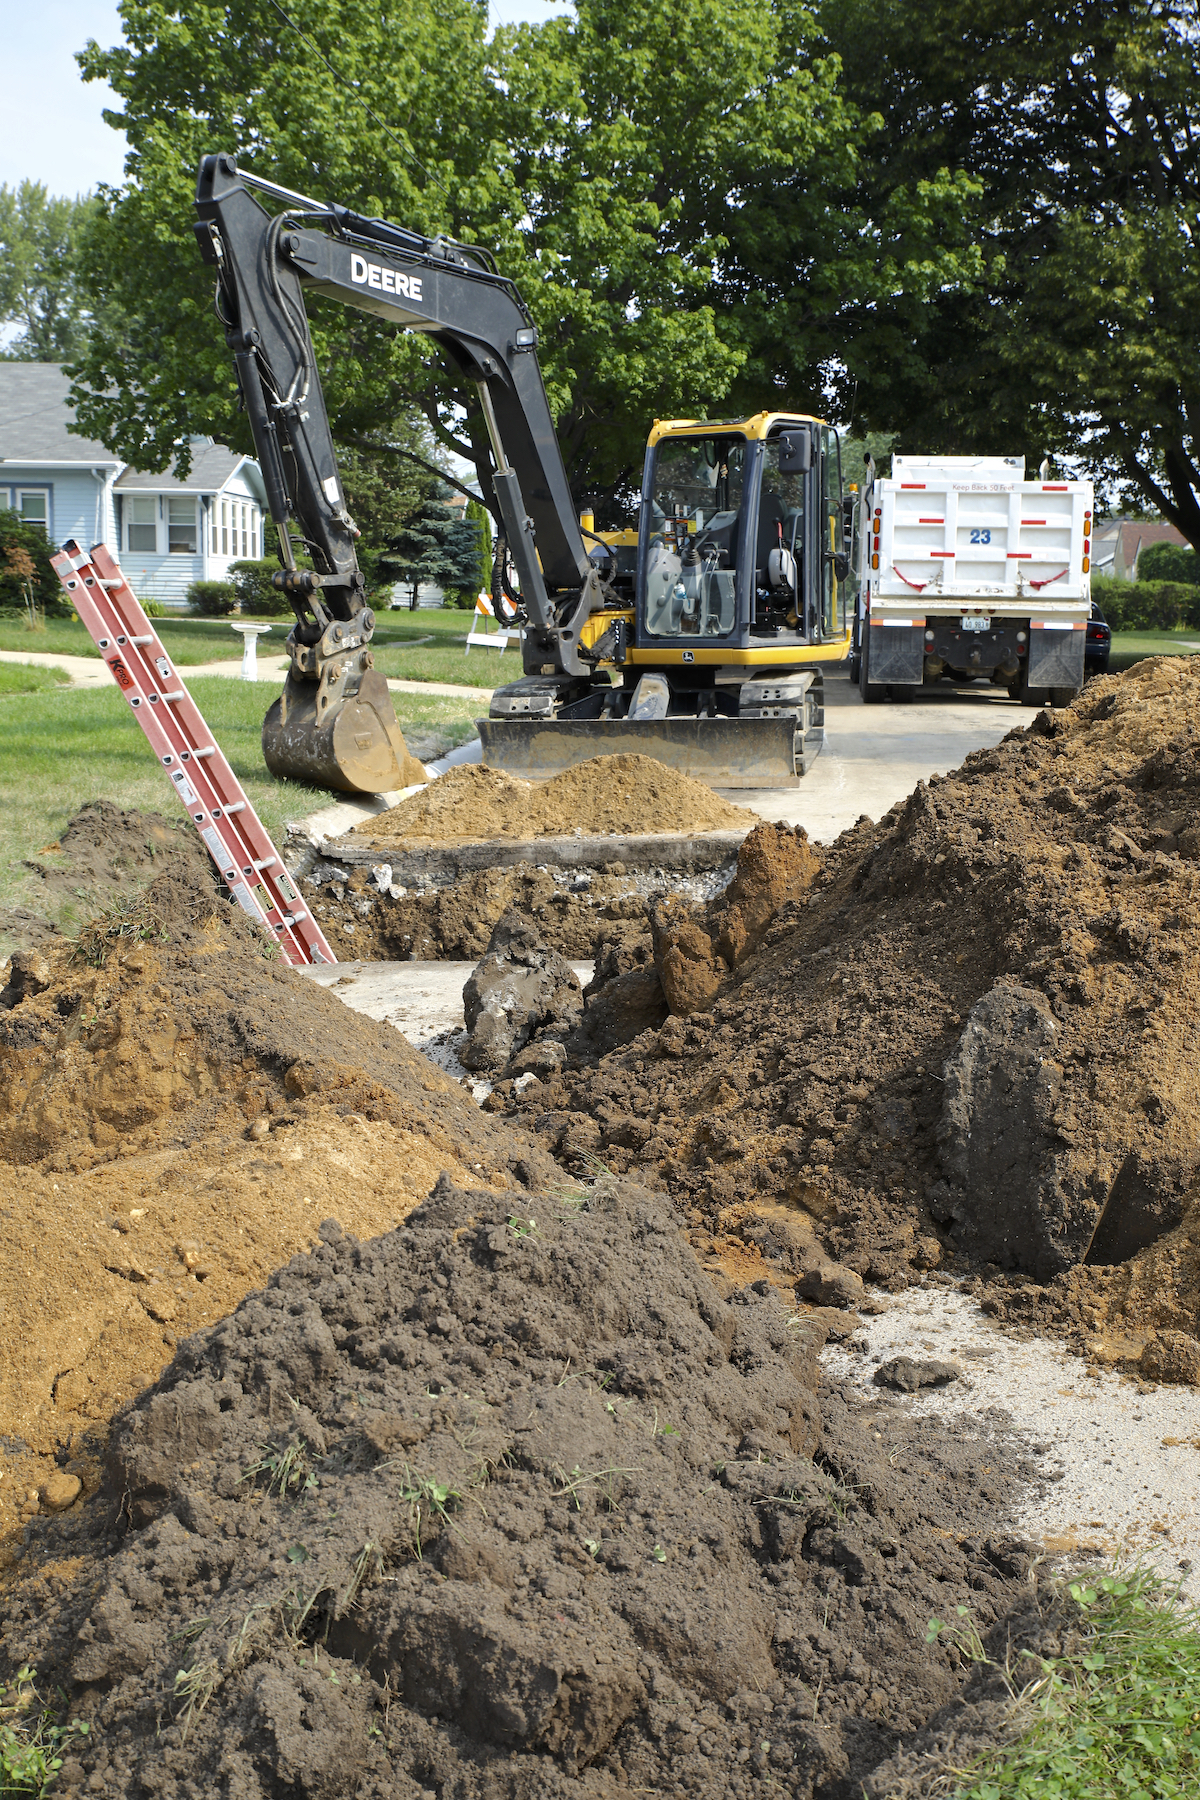 Excavation is required to replace lead service lines on private property.